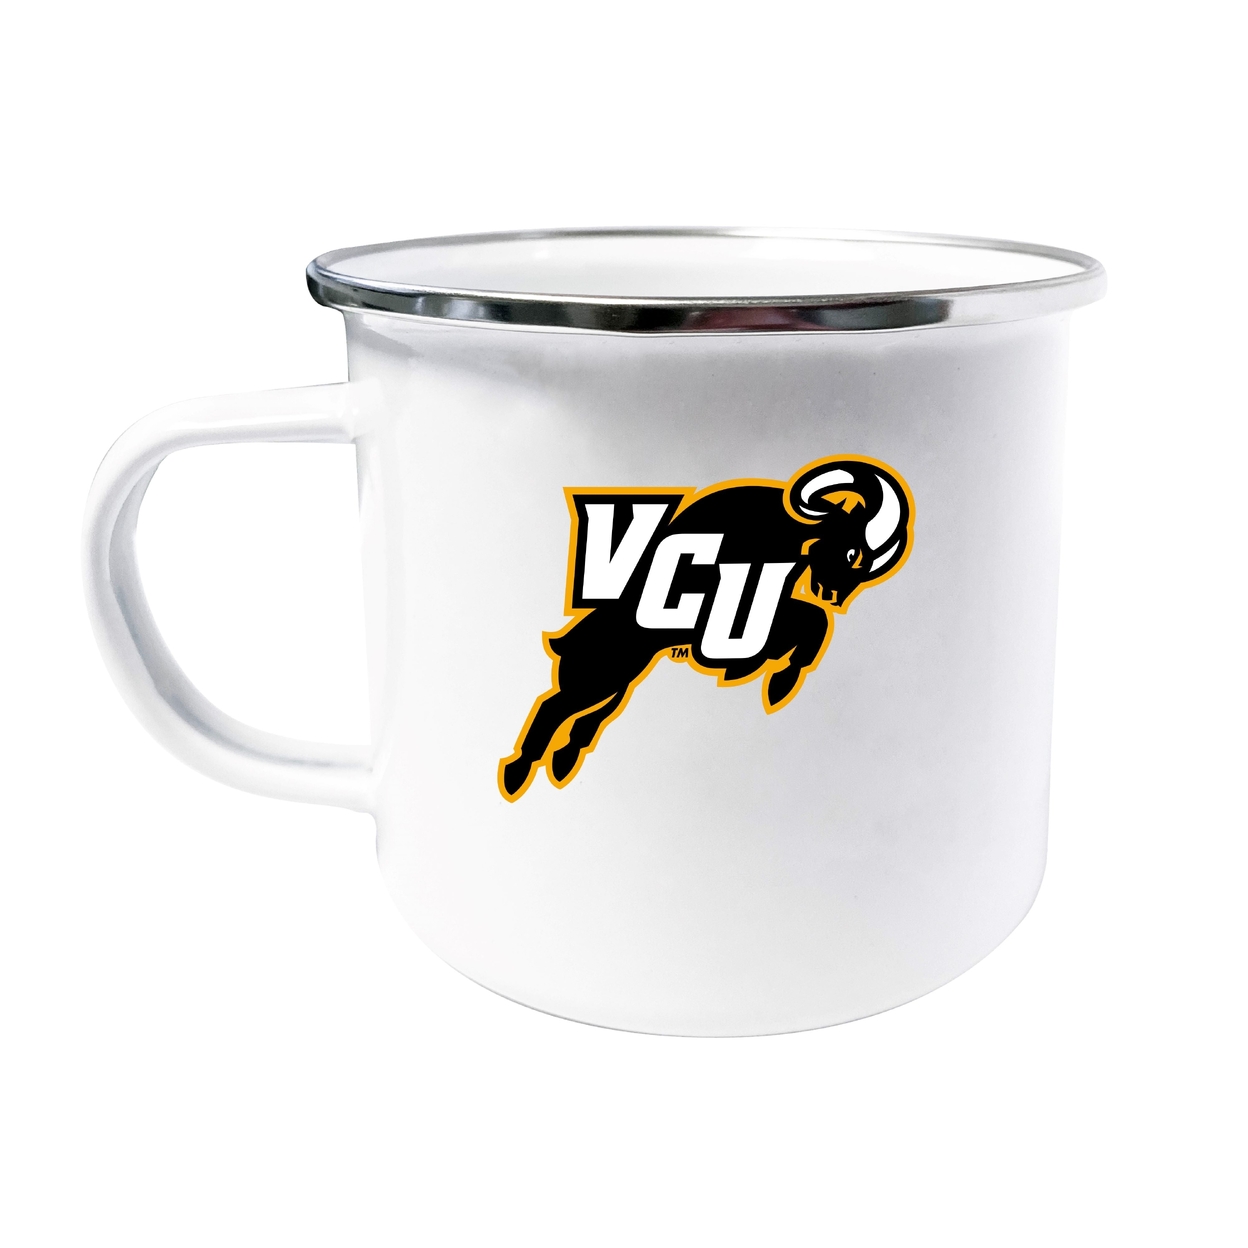 Virginia Commonwealth Tin Camper Coffee Mug - Choose Your Color - White